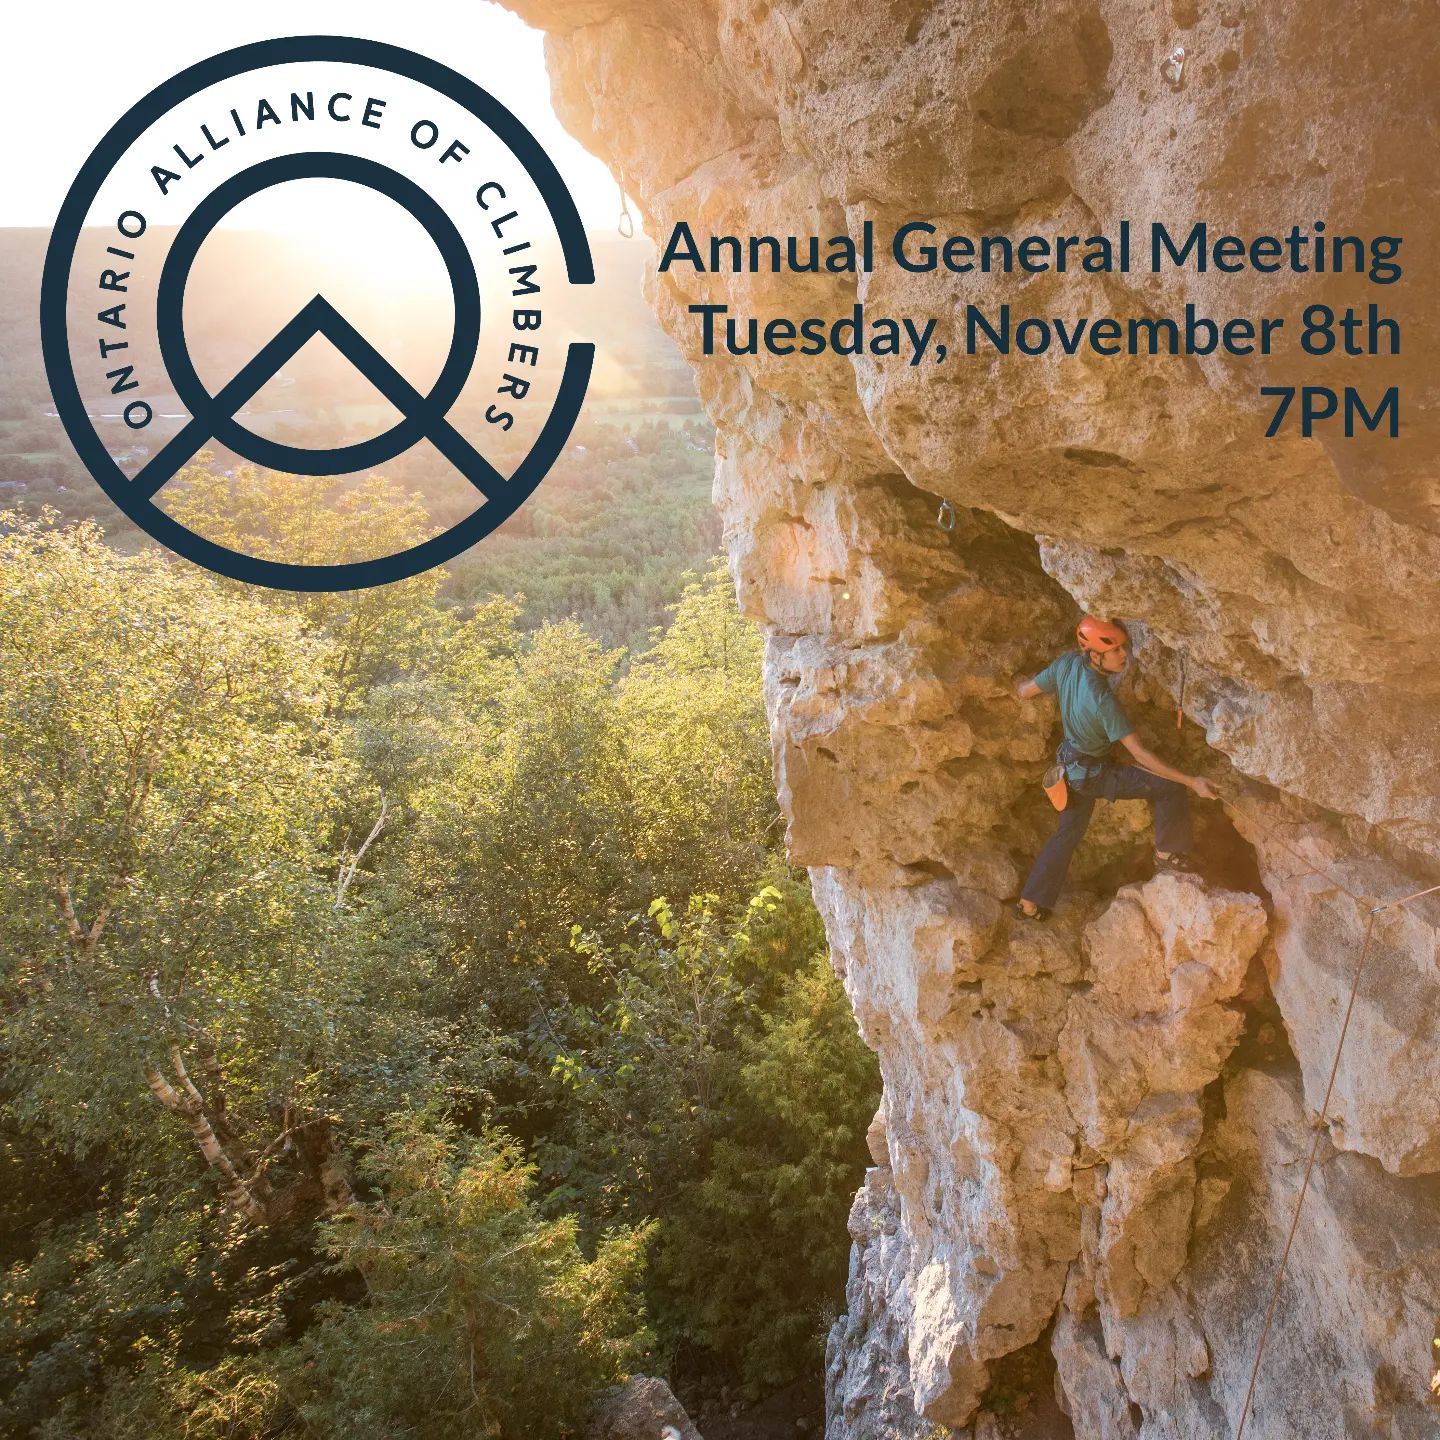 Save the Date:

The OAC Annual General Meeting will be held Tuesday, November 8th, at 7PM!  We will once again be holding our AGM virtually.

This is a great opportunity to ask questions about our organization and to share input on our future direction.  We'll also be holding the election for board membership, talking about recent developments, and speaking about what's on the horizon.

If you would like to run as a candidate for the board of directors, please submit your bio to info@ontarioallianceofclimbers.ca by October 21.  Details for the virtual meeting will be announced October 25 via official email to all OAC members.  Hope to see you all there!

📸 @alan.tom_

#ontario #climbing #access #agm #savethedate